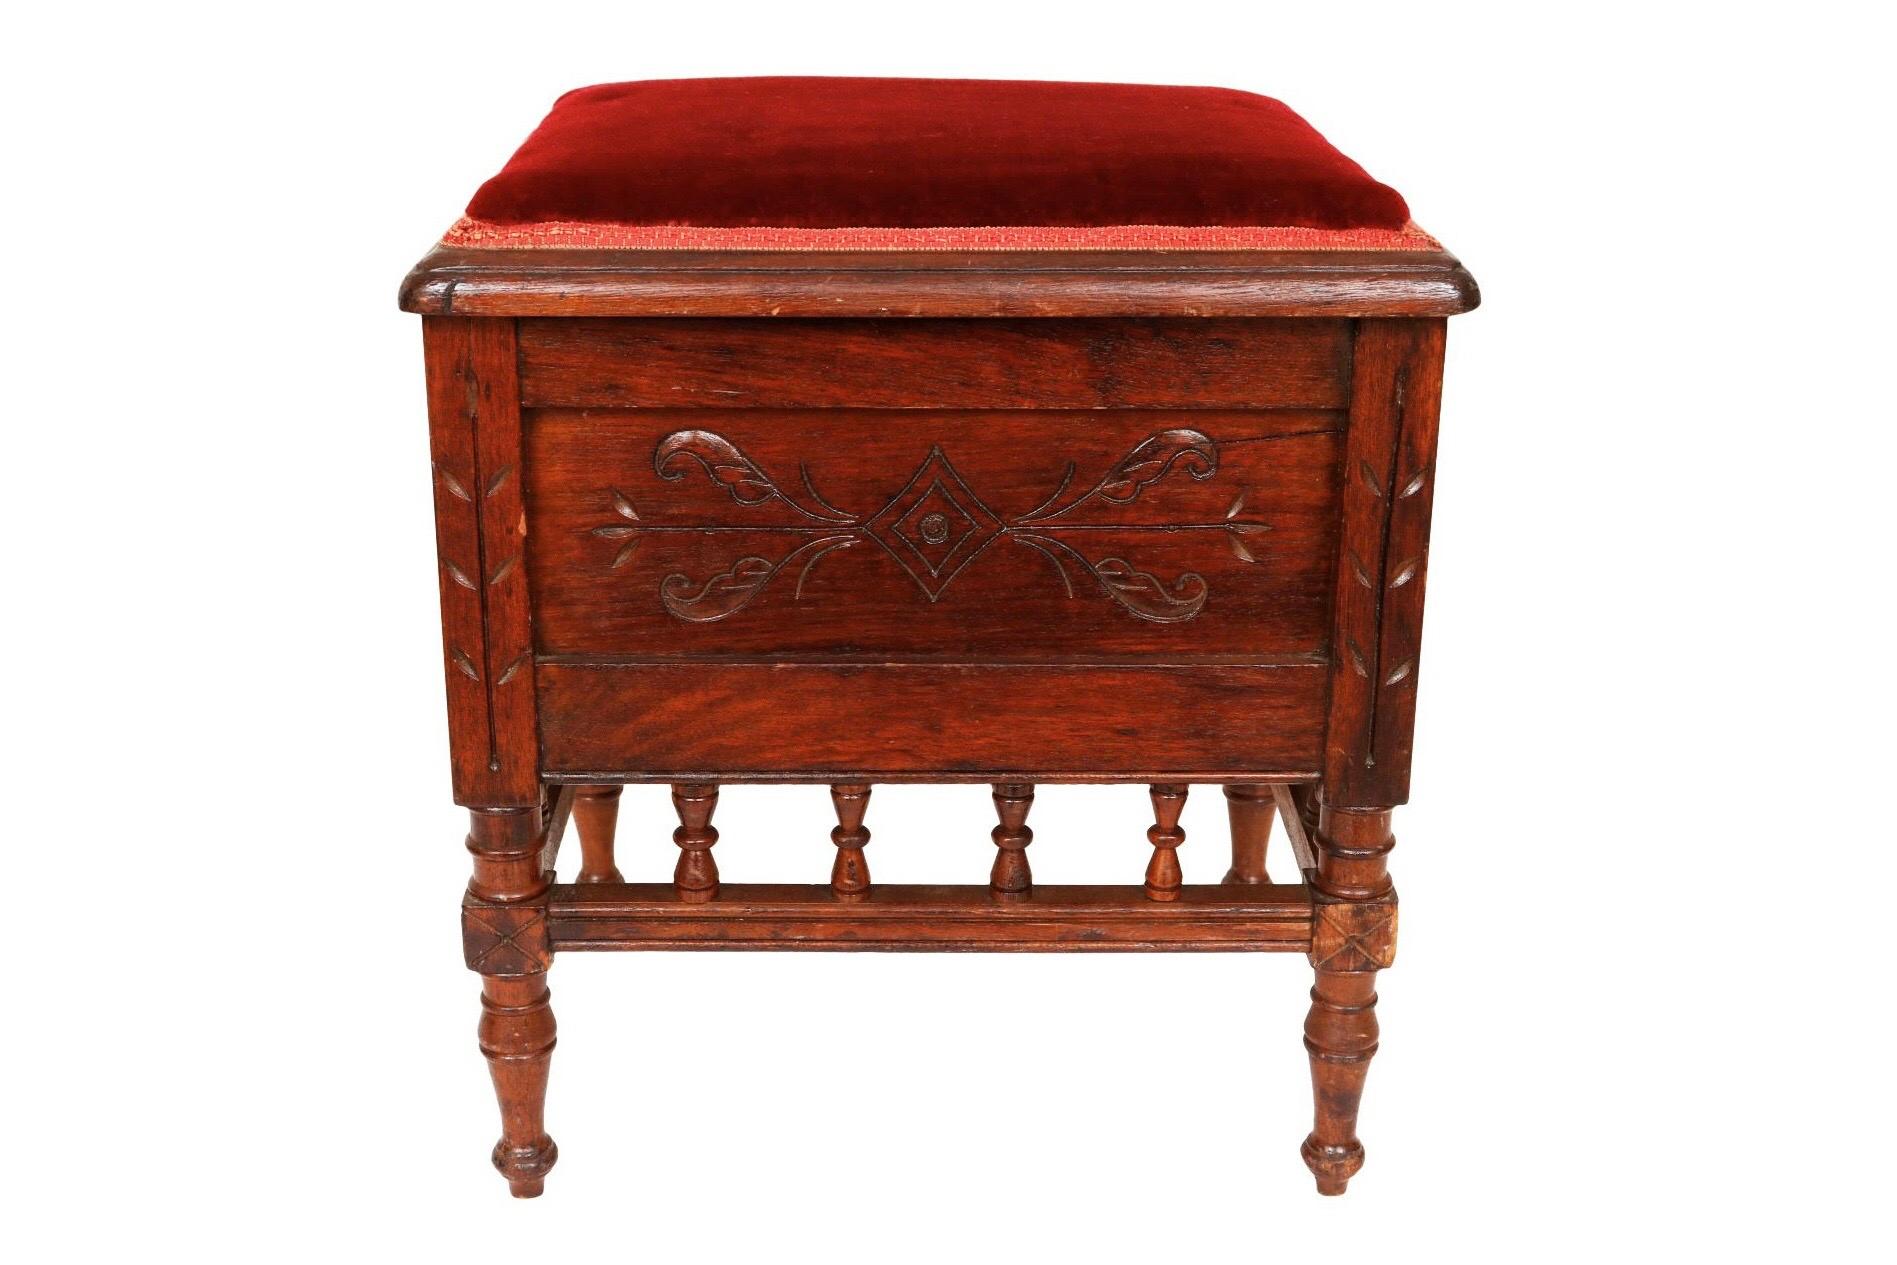 An antique shoe shine box stool. The hinged lid is covered in red velvet finished with a red gimp. Sides are decorated with simple Eastlake carvings. Inside is housed a cast iron shoe shine foot rest cast with a floral motif and a central love